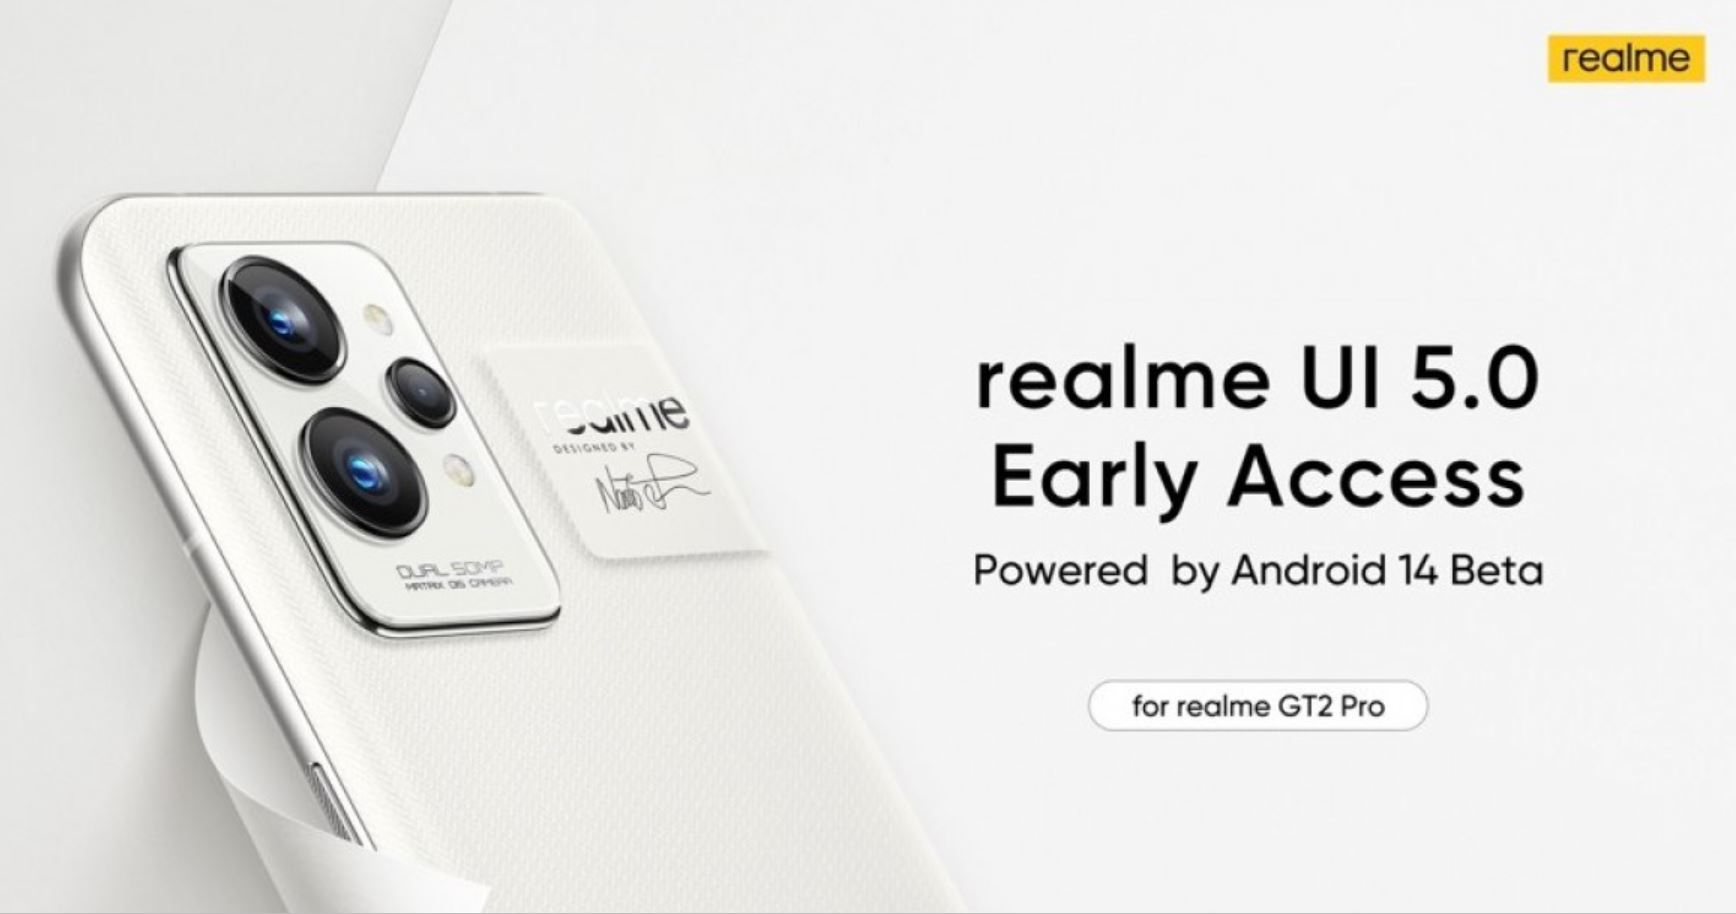 Realme GT2 Pro Android 14 - Exciting news for Realme GT2 Pro users in India and Russia! Realme has officially unveiled the early access program for the Android 14